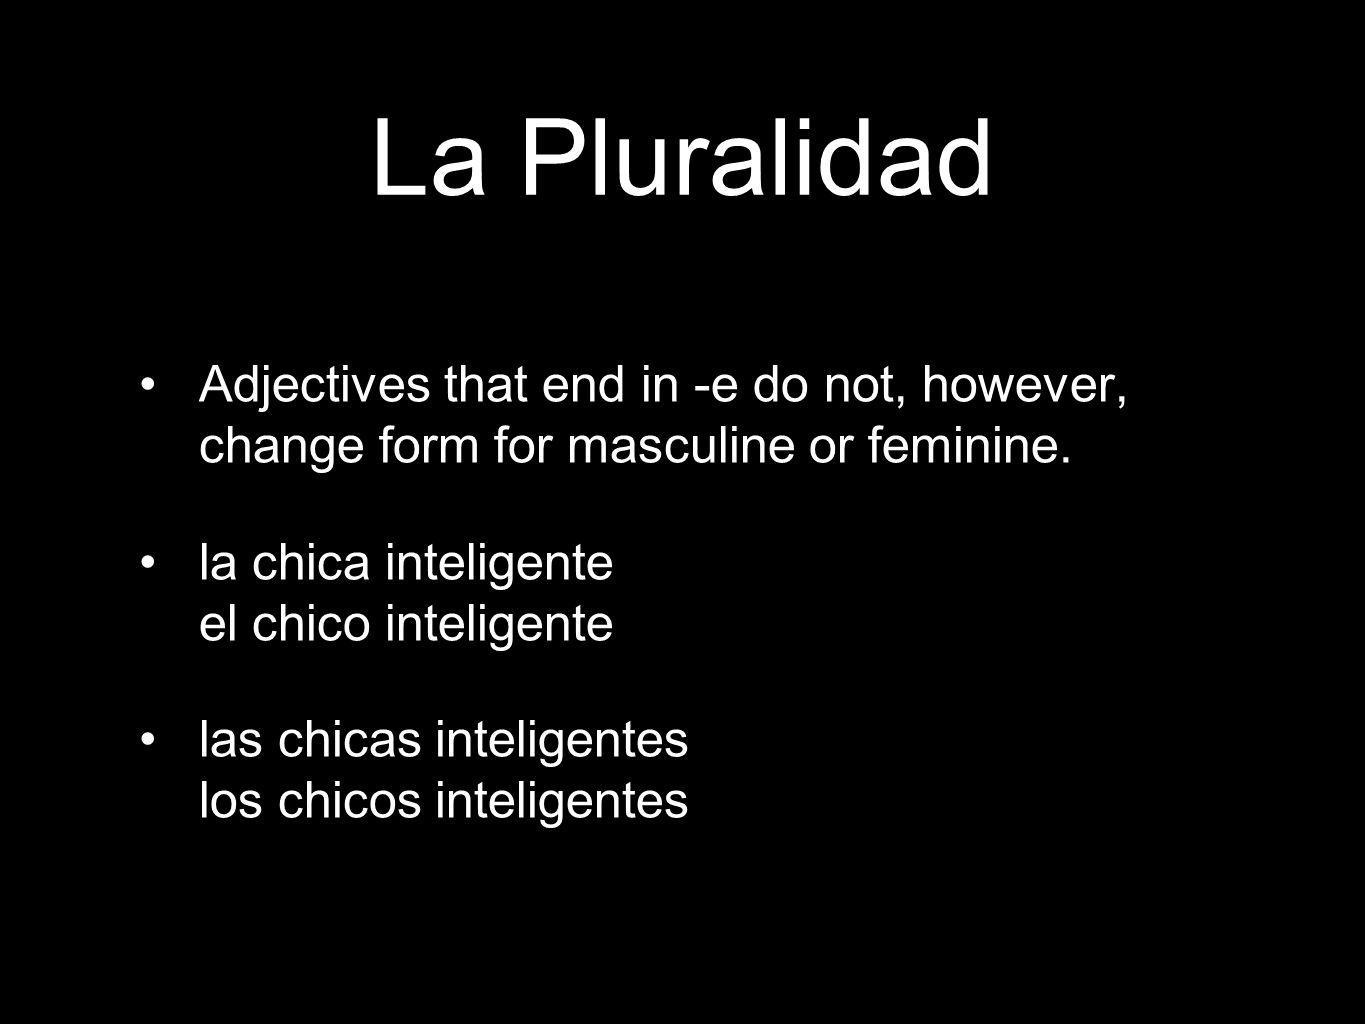 La Pluralidad Adjectives that end in -e do not, however, change form for masculine or feminine.